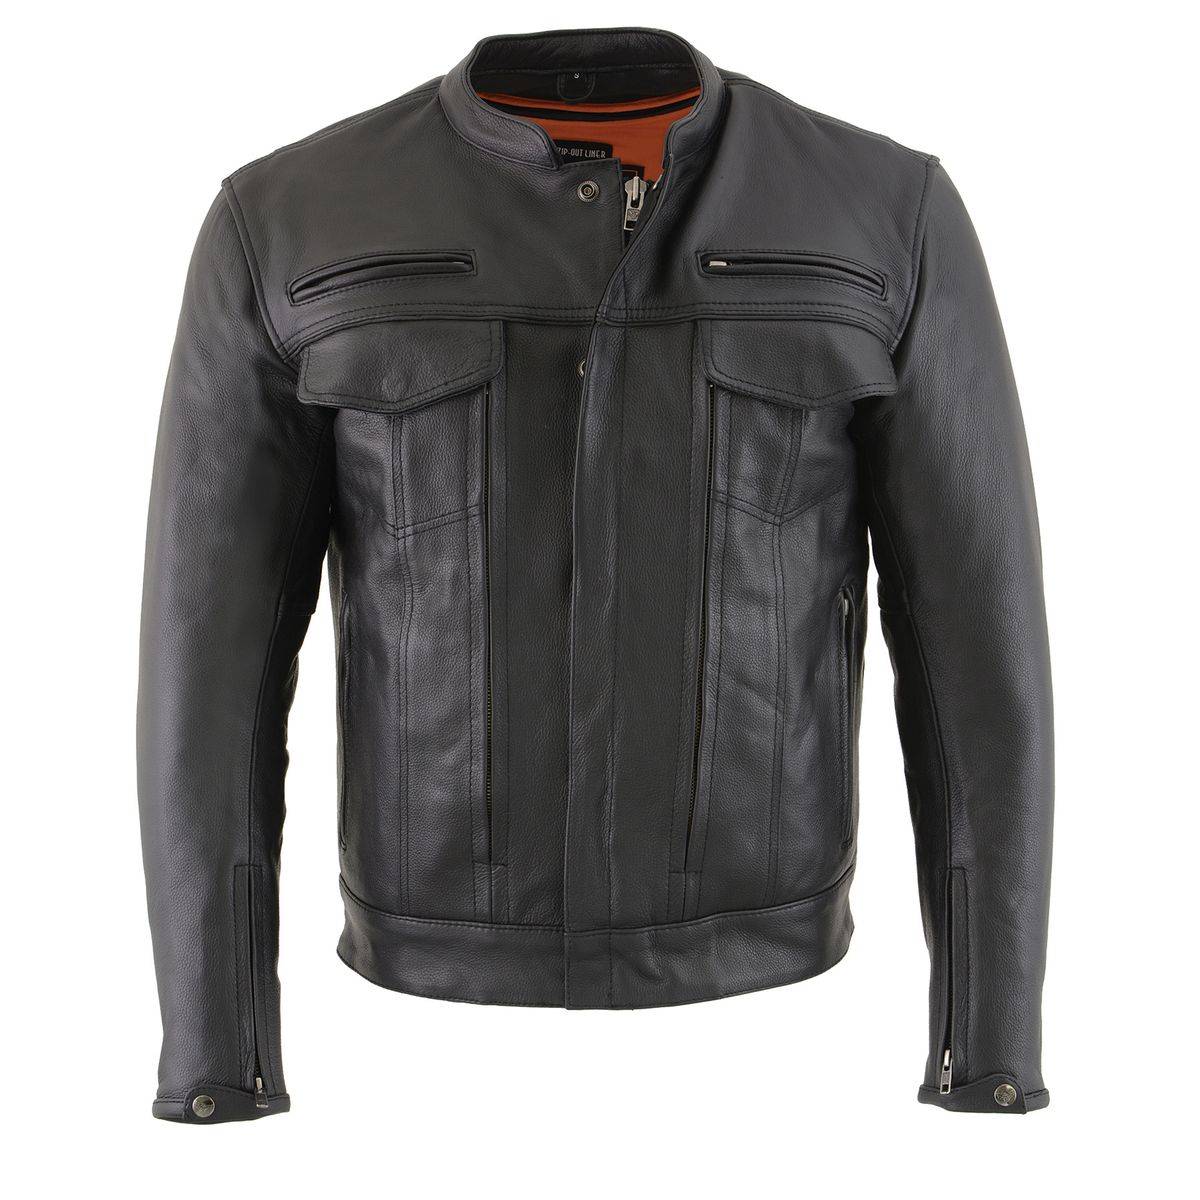 Men's Jackets Made in the USA | American Retail